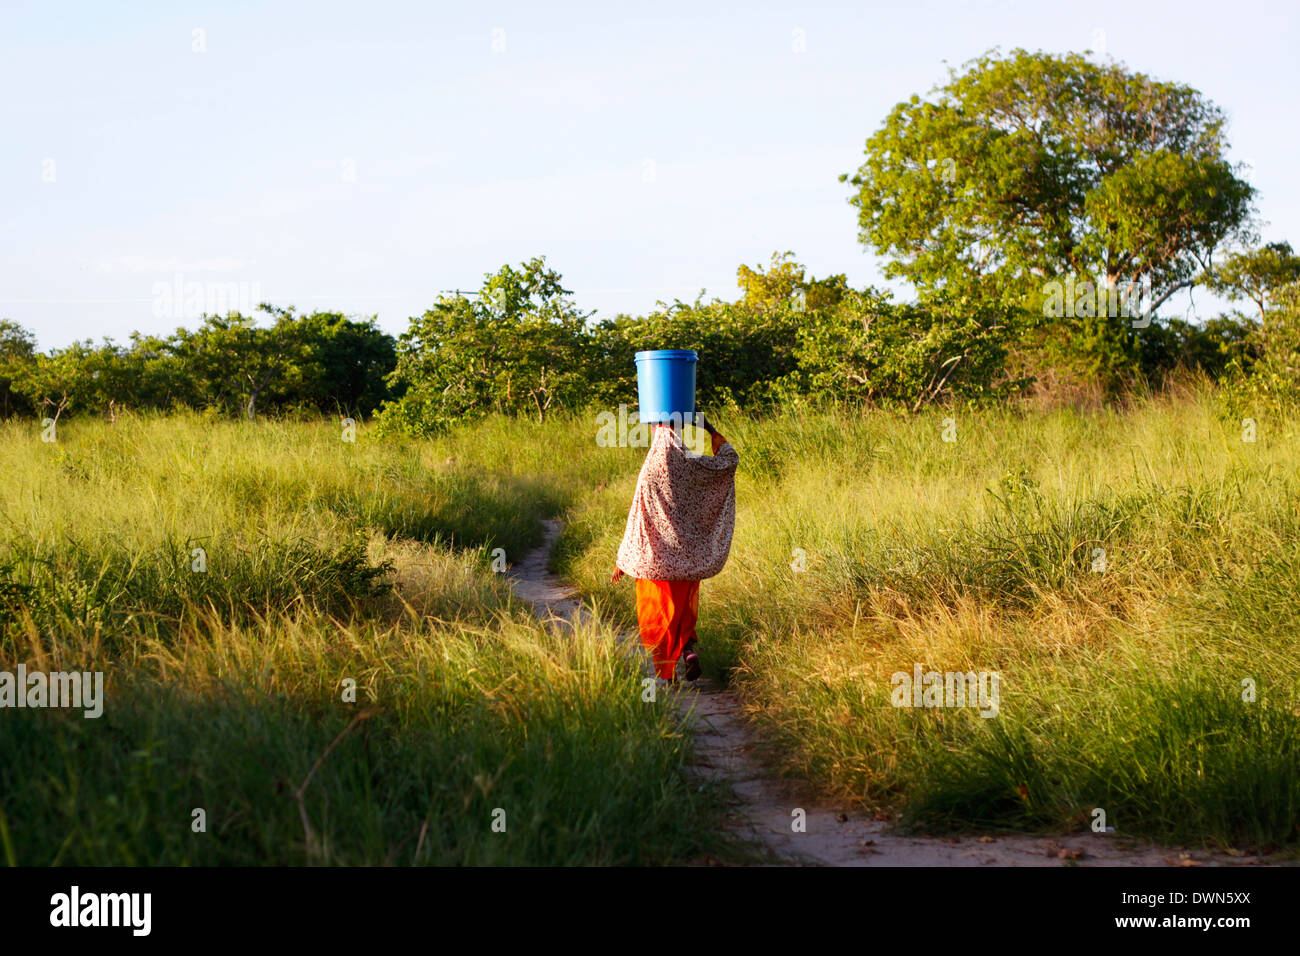 Woman walks across the bush caring a bucket full of water on top of her head in Quirimbas National Park, Mozambique. Stock Photo